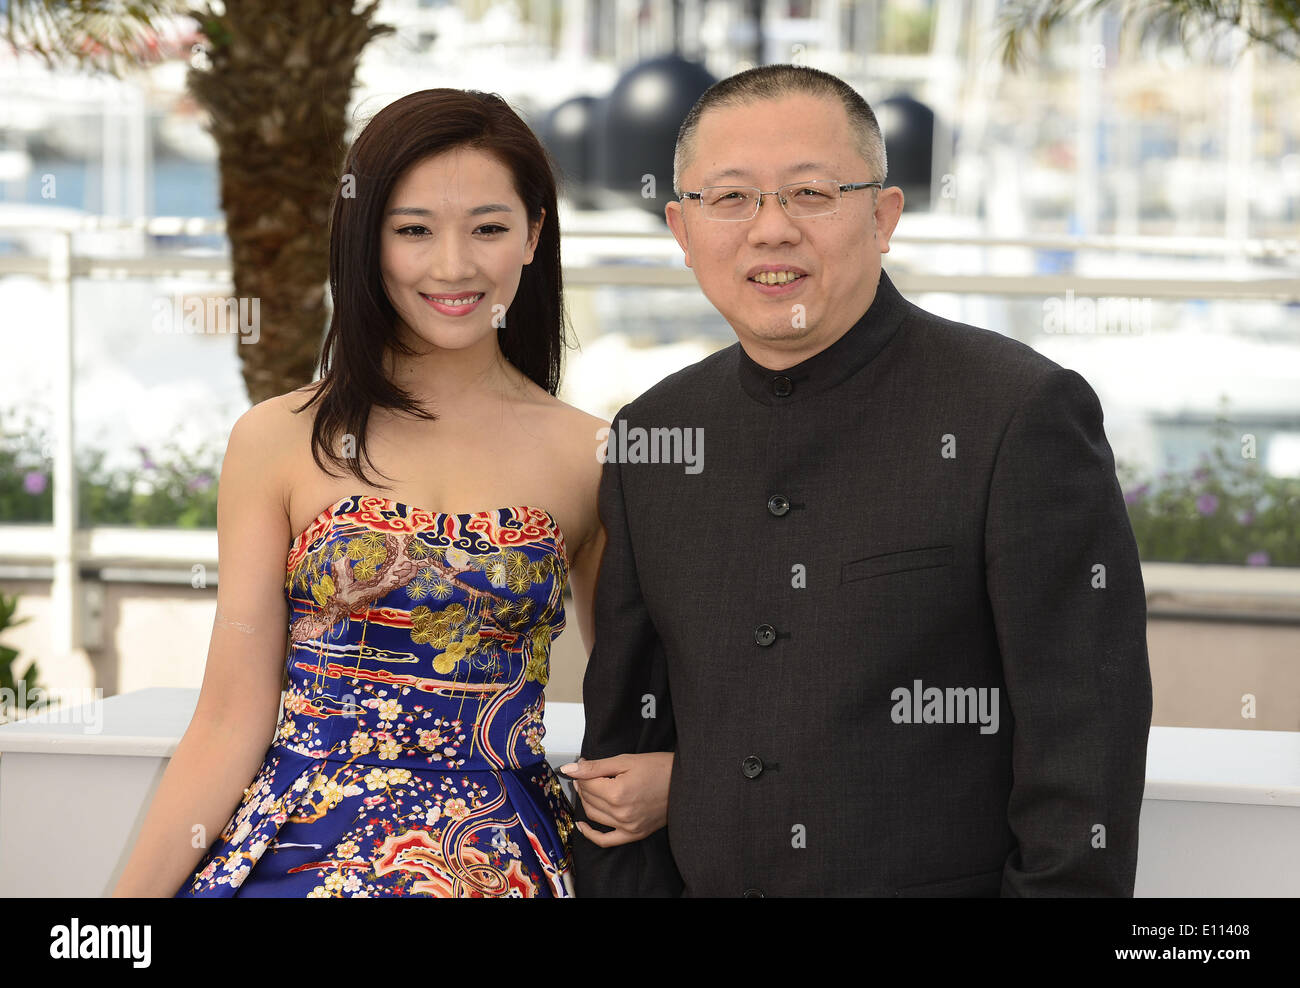 Cannes, France. 21st May, 2014. Chinese director Wang Chao (R) and actress Jian Renzi pose during the photocall of film Fantasia at the 67th Cannes Film Festival in Cannes, France, May 21, 2014. The film is presented in Un Certain Regard unit of the festival which runs from 14 to 25 May. Credit:  Ye Pingfan/Xinhua/Alamy Live News Stock Photo